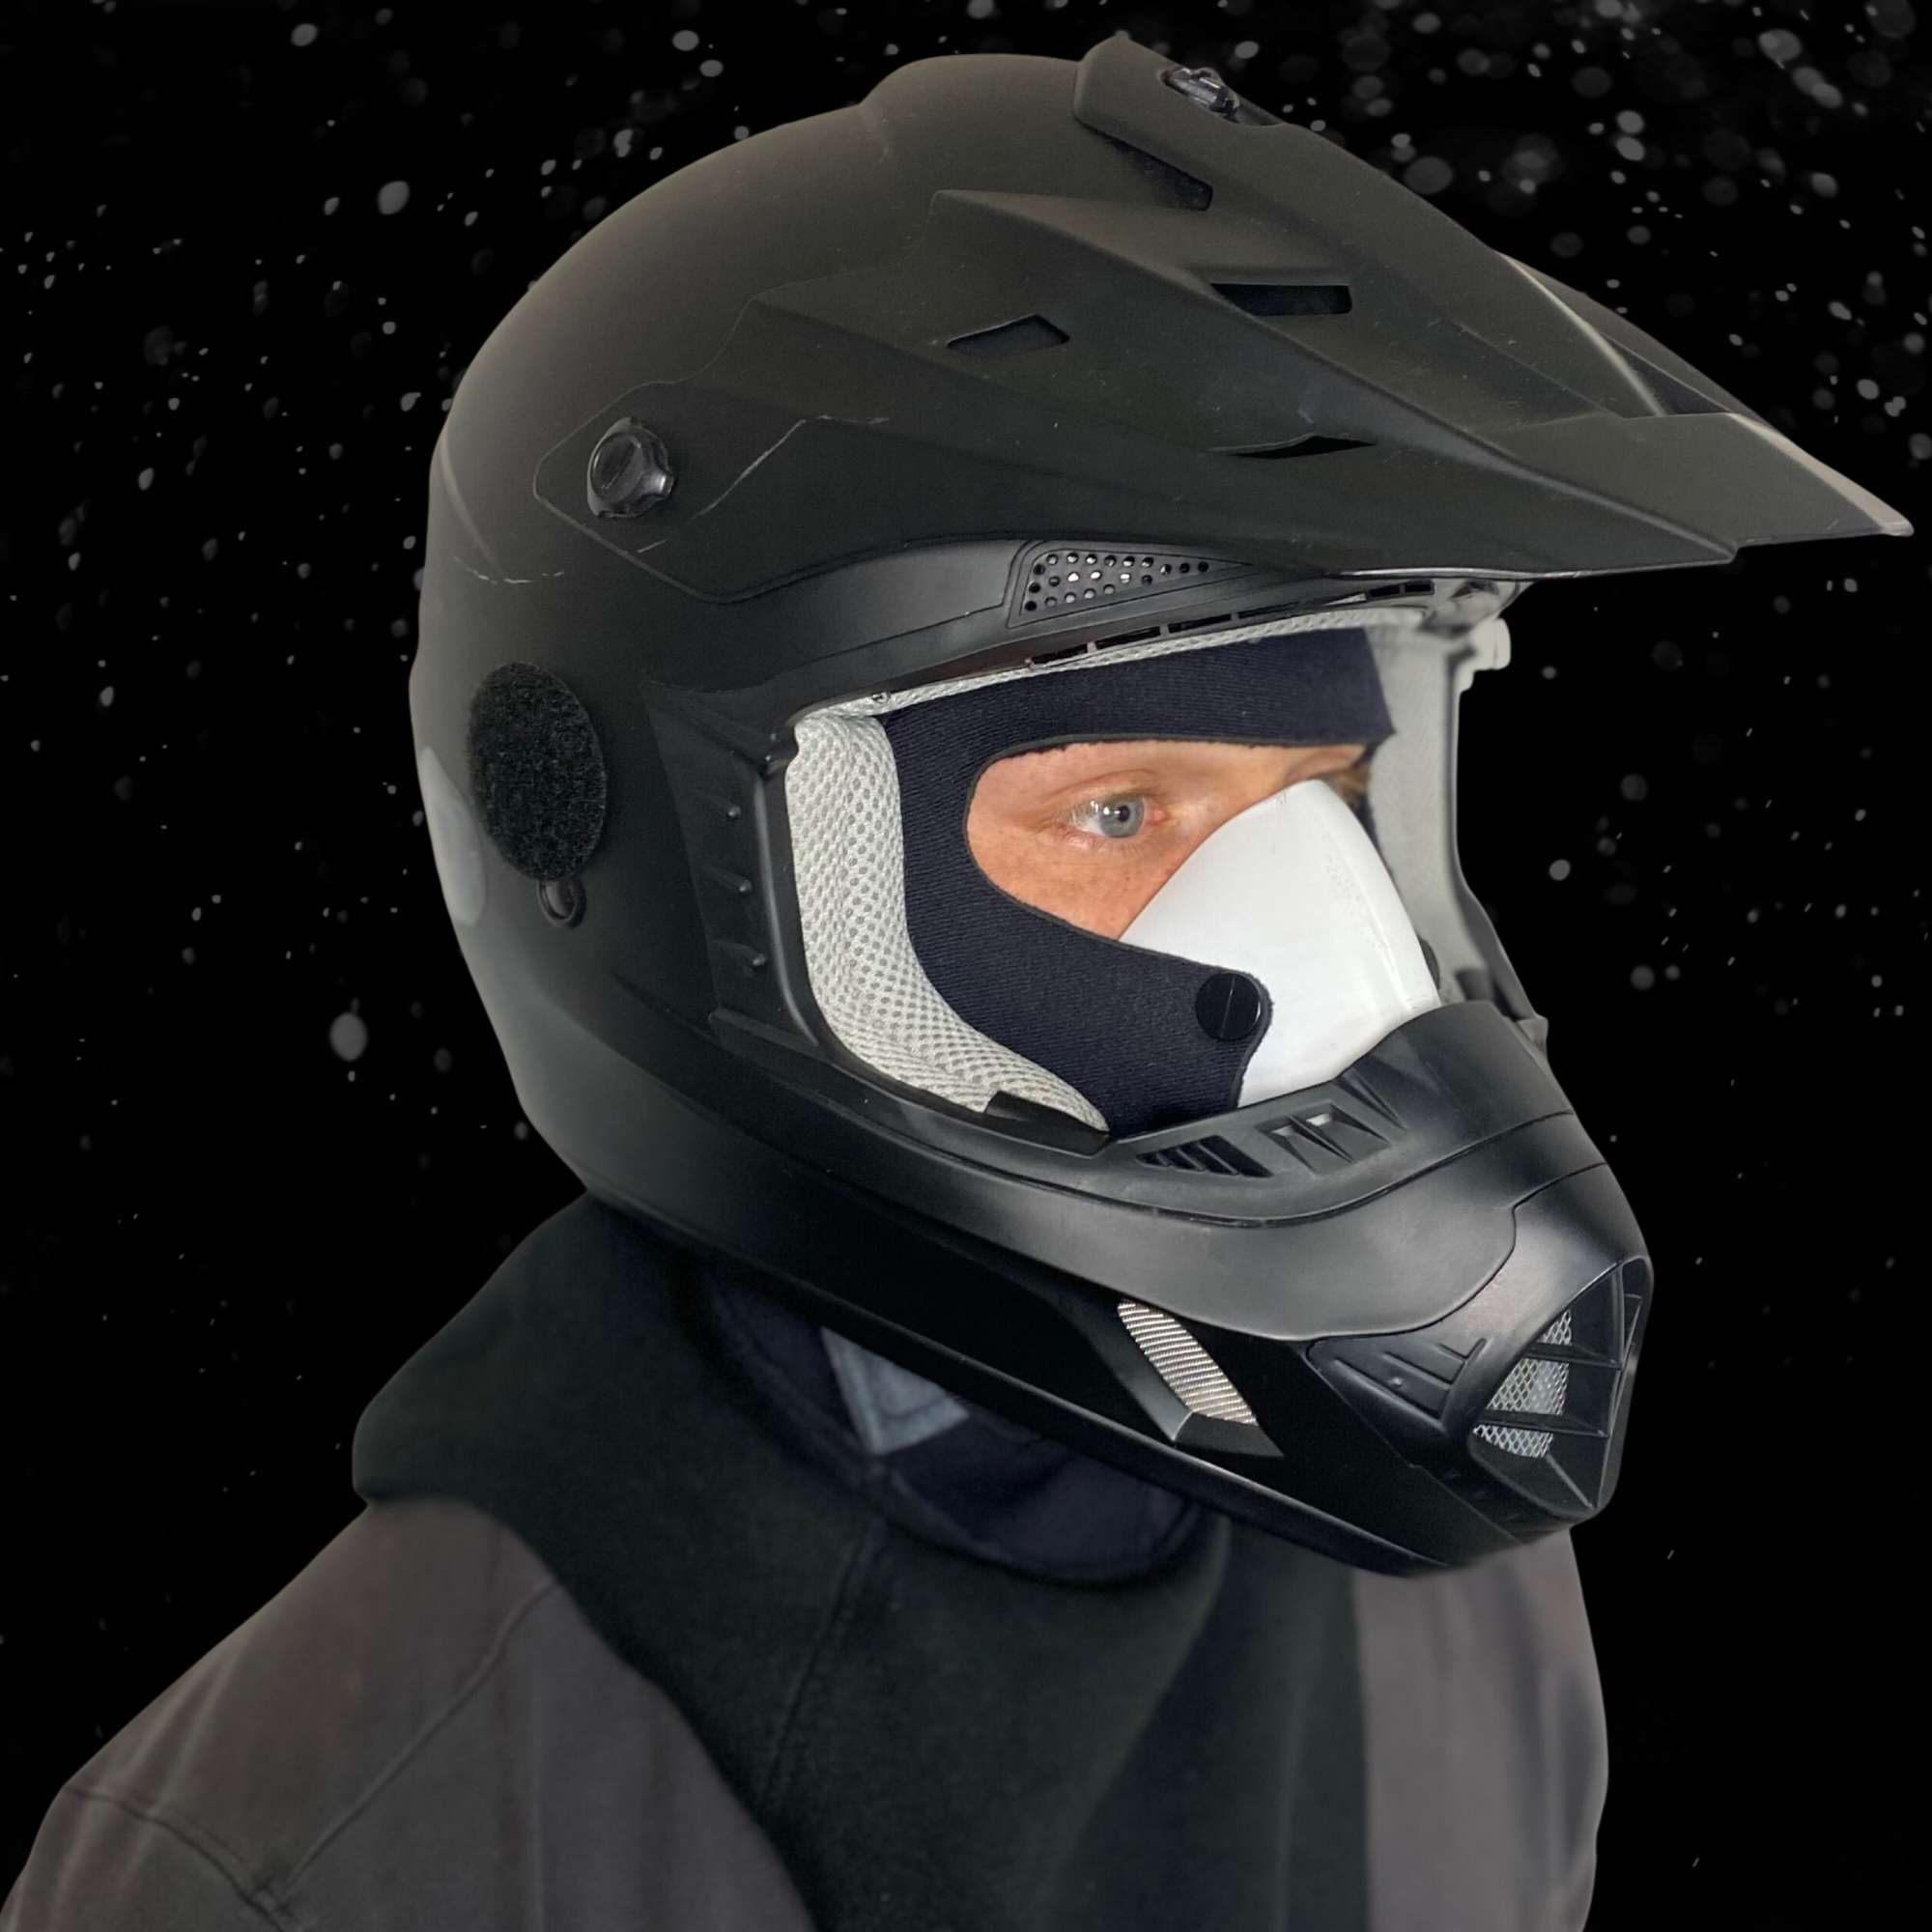 Demonstration of the gear compatibility with motocross style helmets.